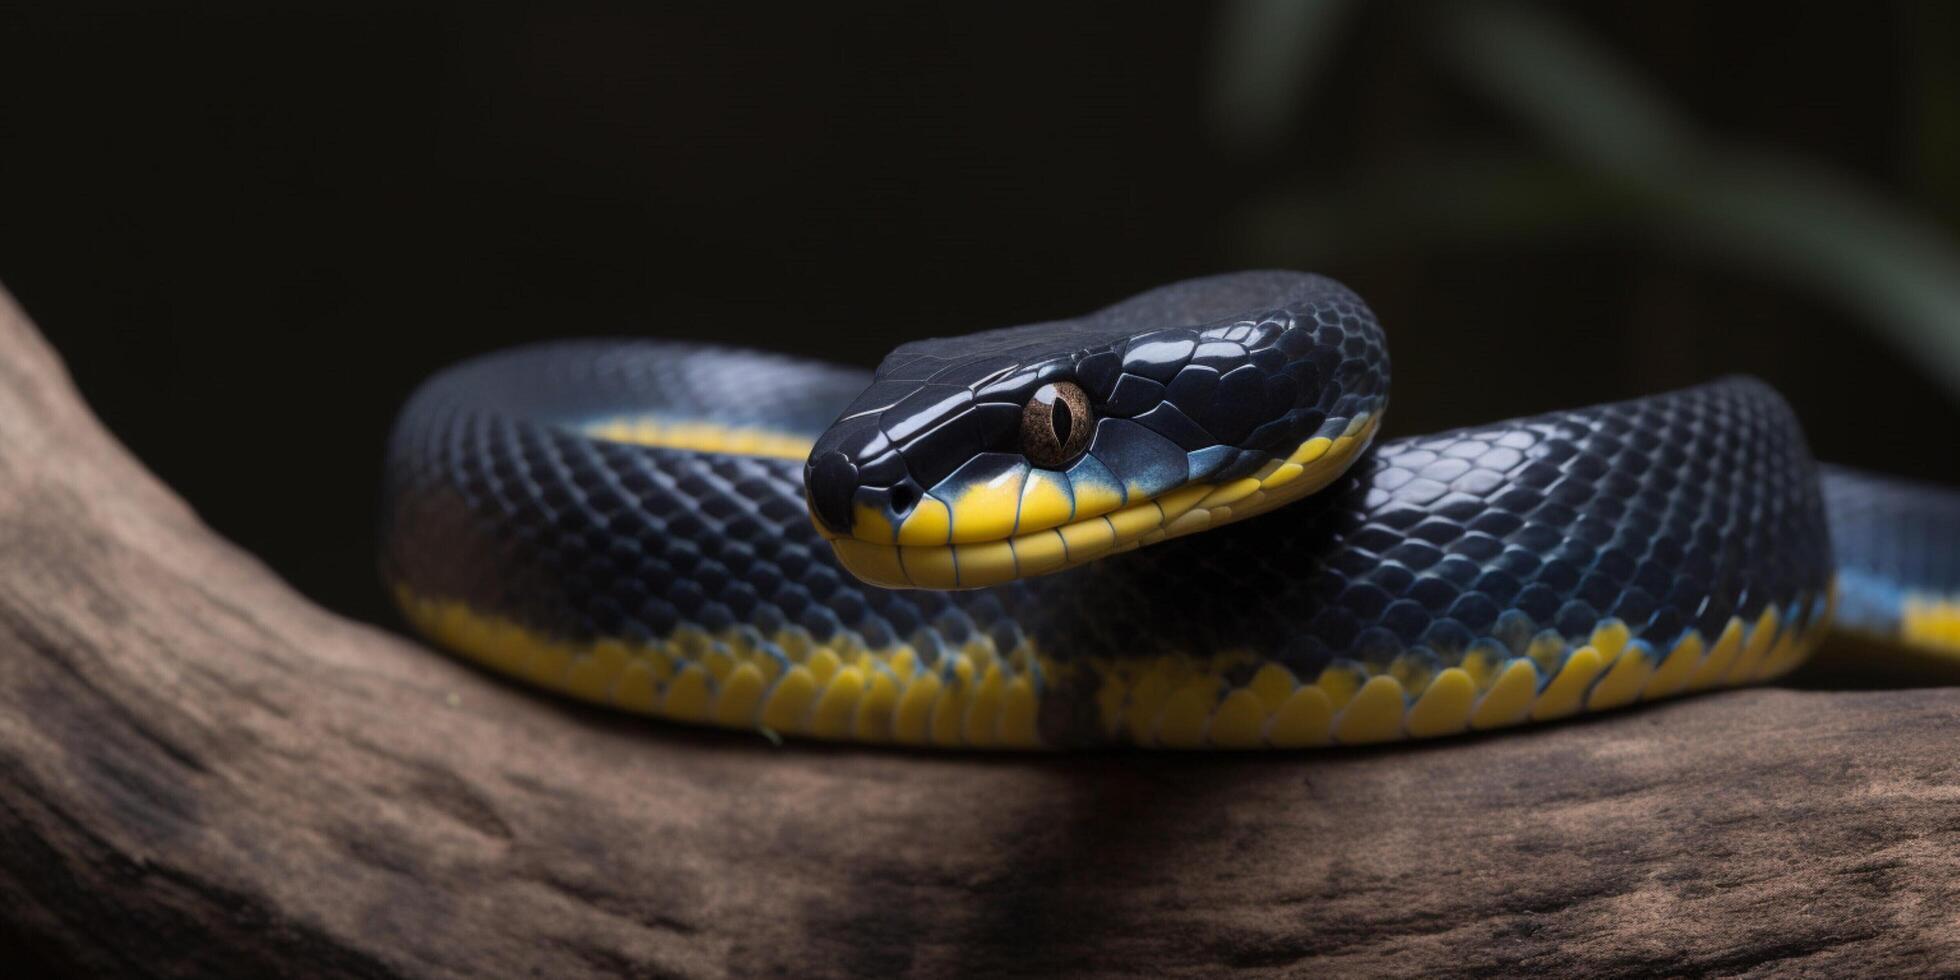 A snake with bright yelllow eyes and blue body photo